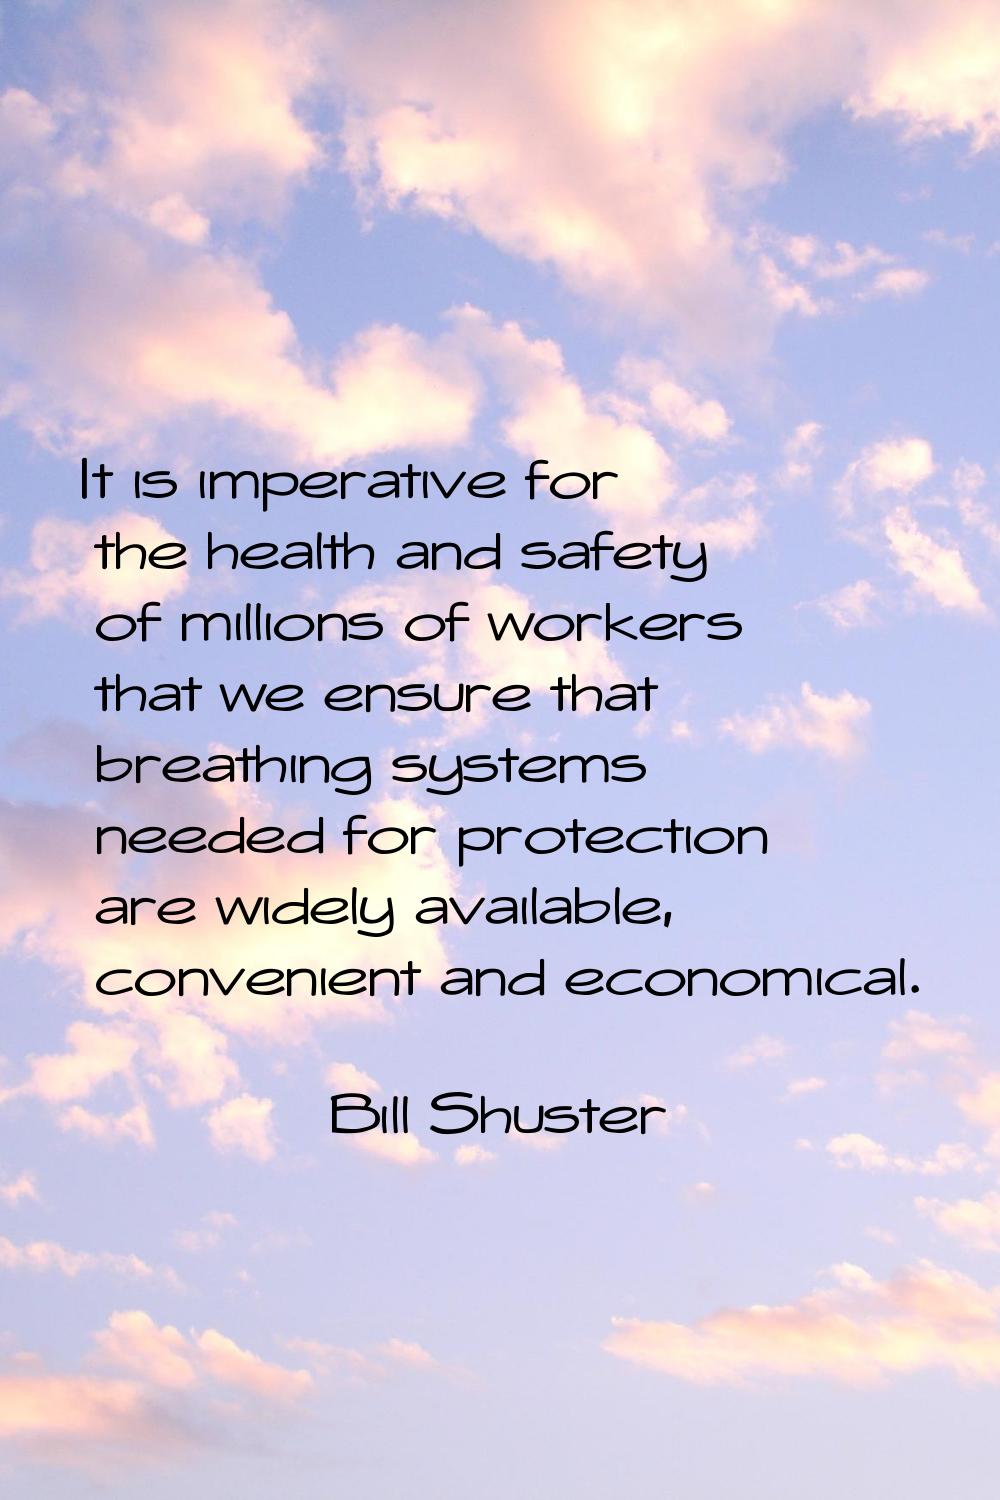 It is imperative for the health and safety of millions of workers that we ensure that breathing sys